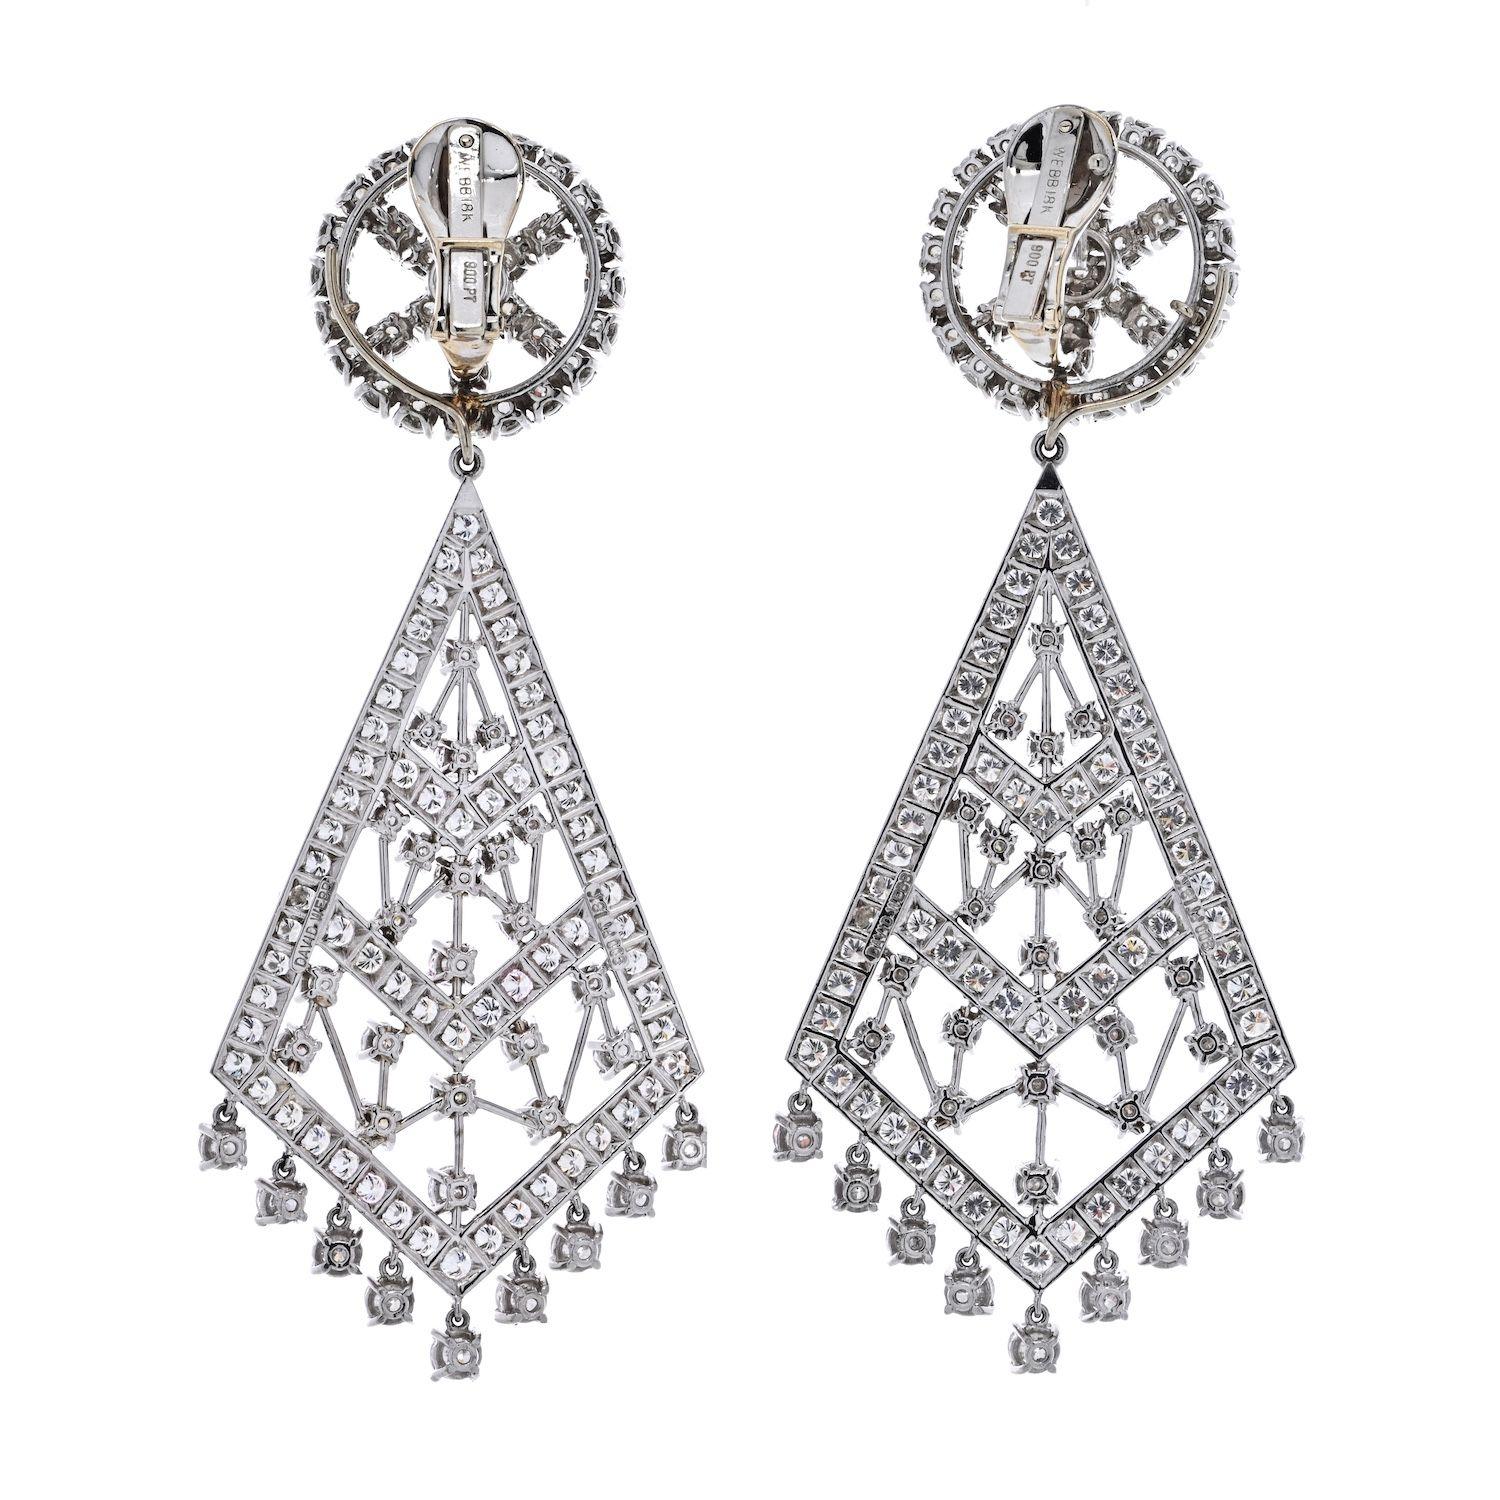 David Webb Platinum 36 Carats Diamond Chandelier Earrings In Excellent Condition For Sale In New York, NY